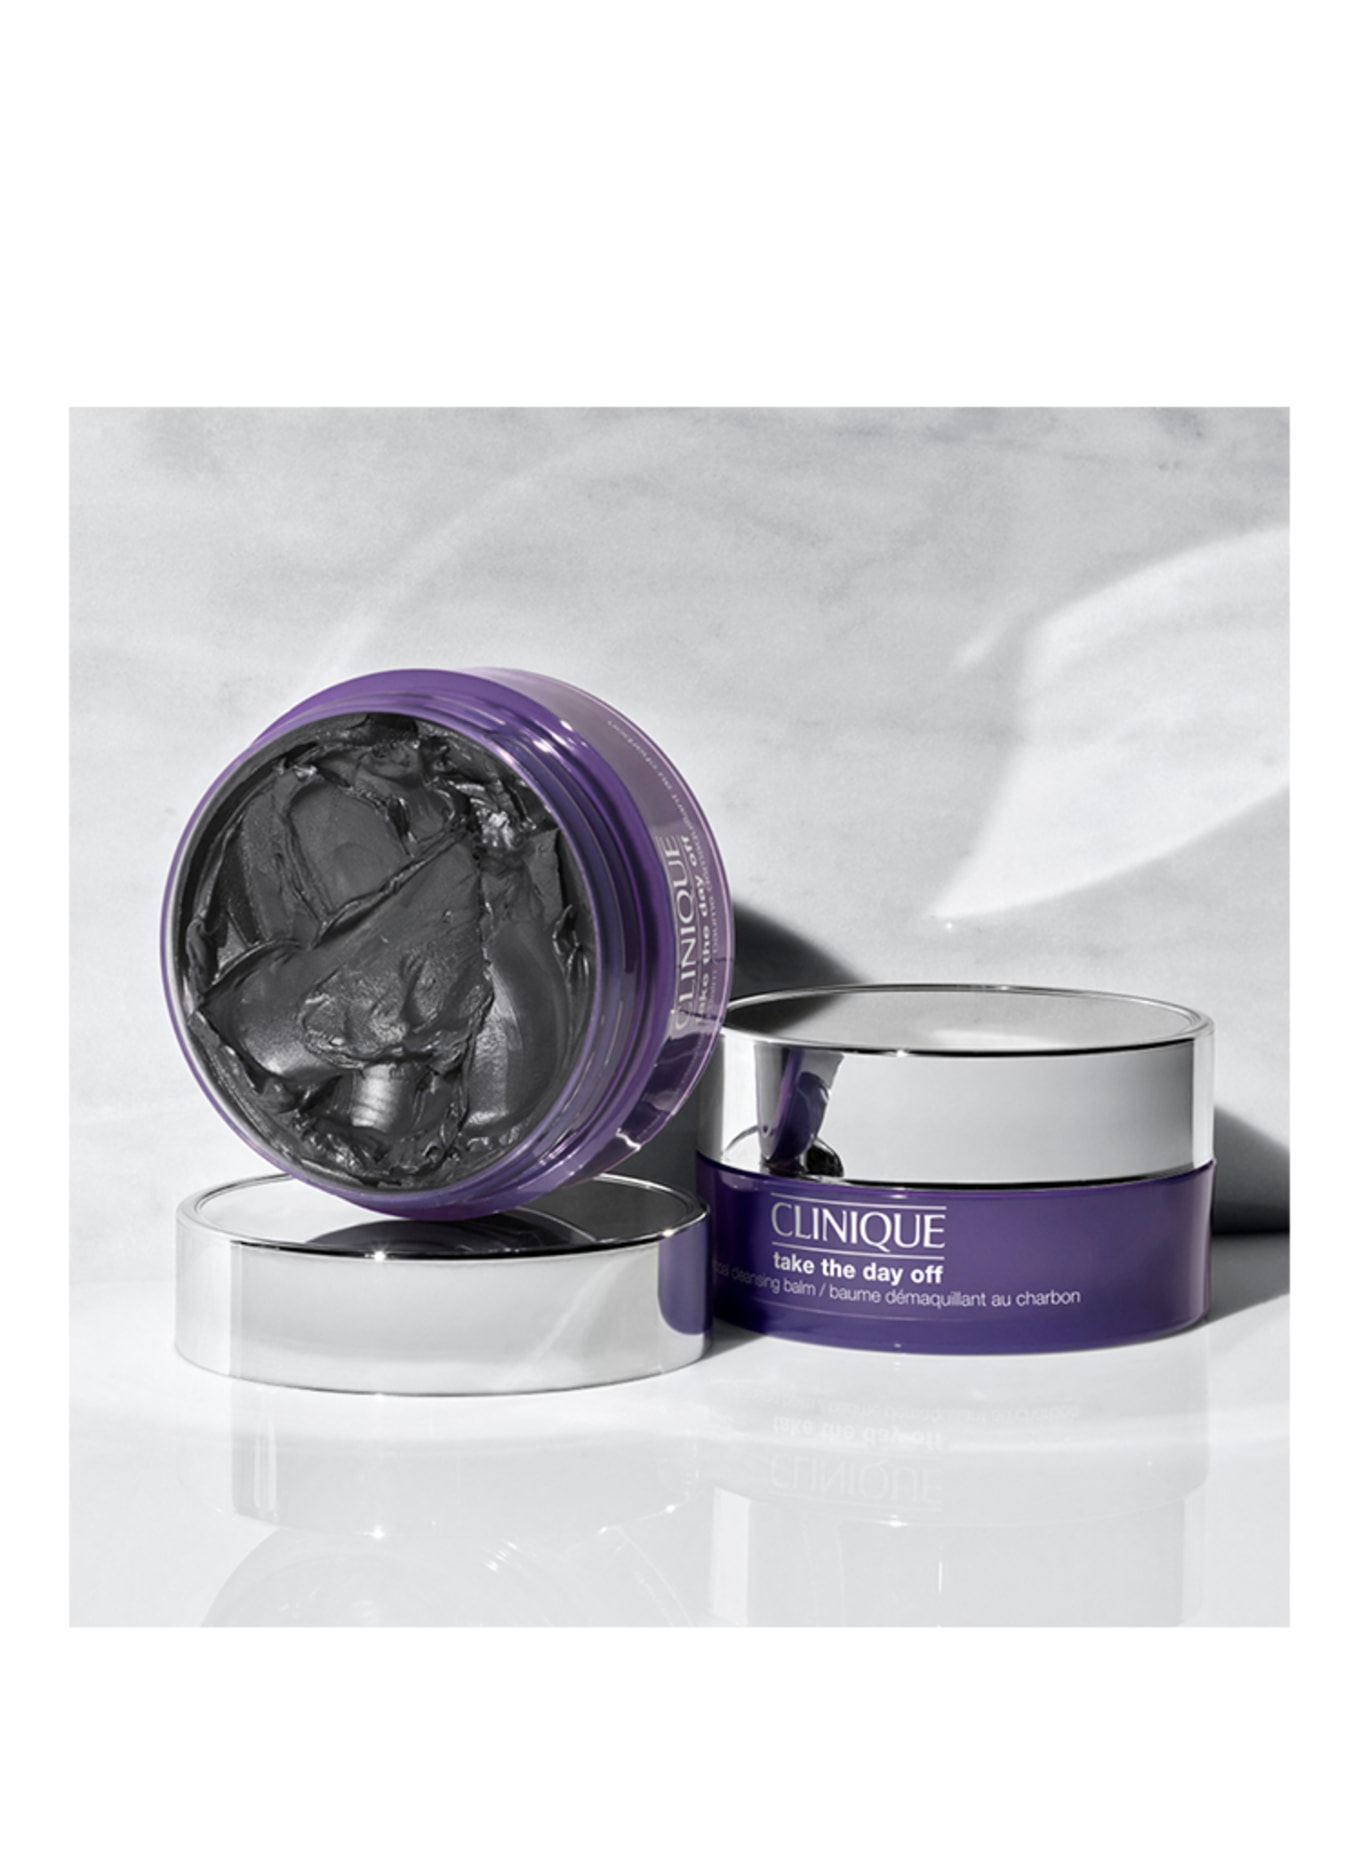 CLINIQUE TAKE THE DAY OFF CHARCOAL CLEANSING BALM (Bild 3)